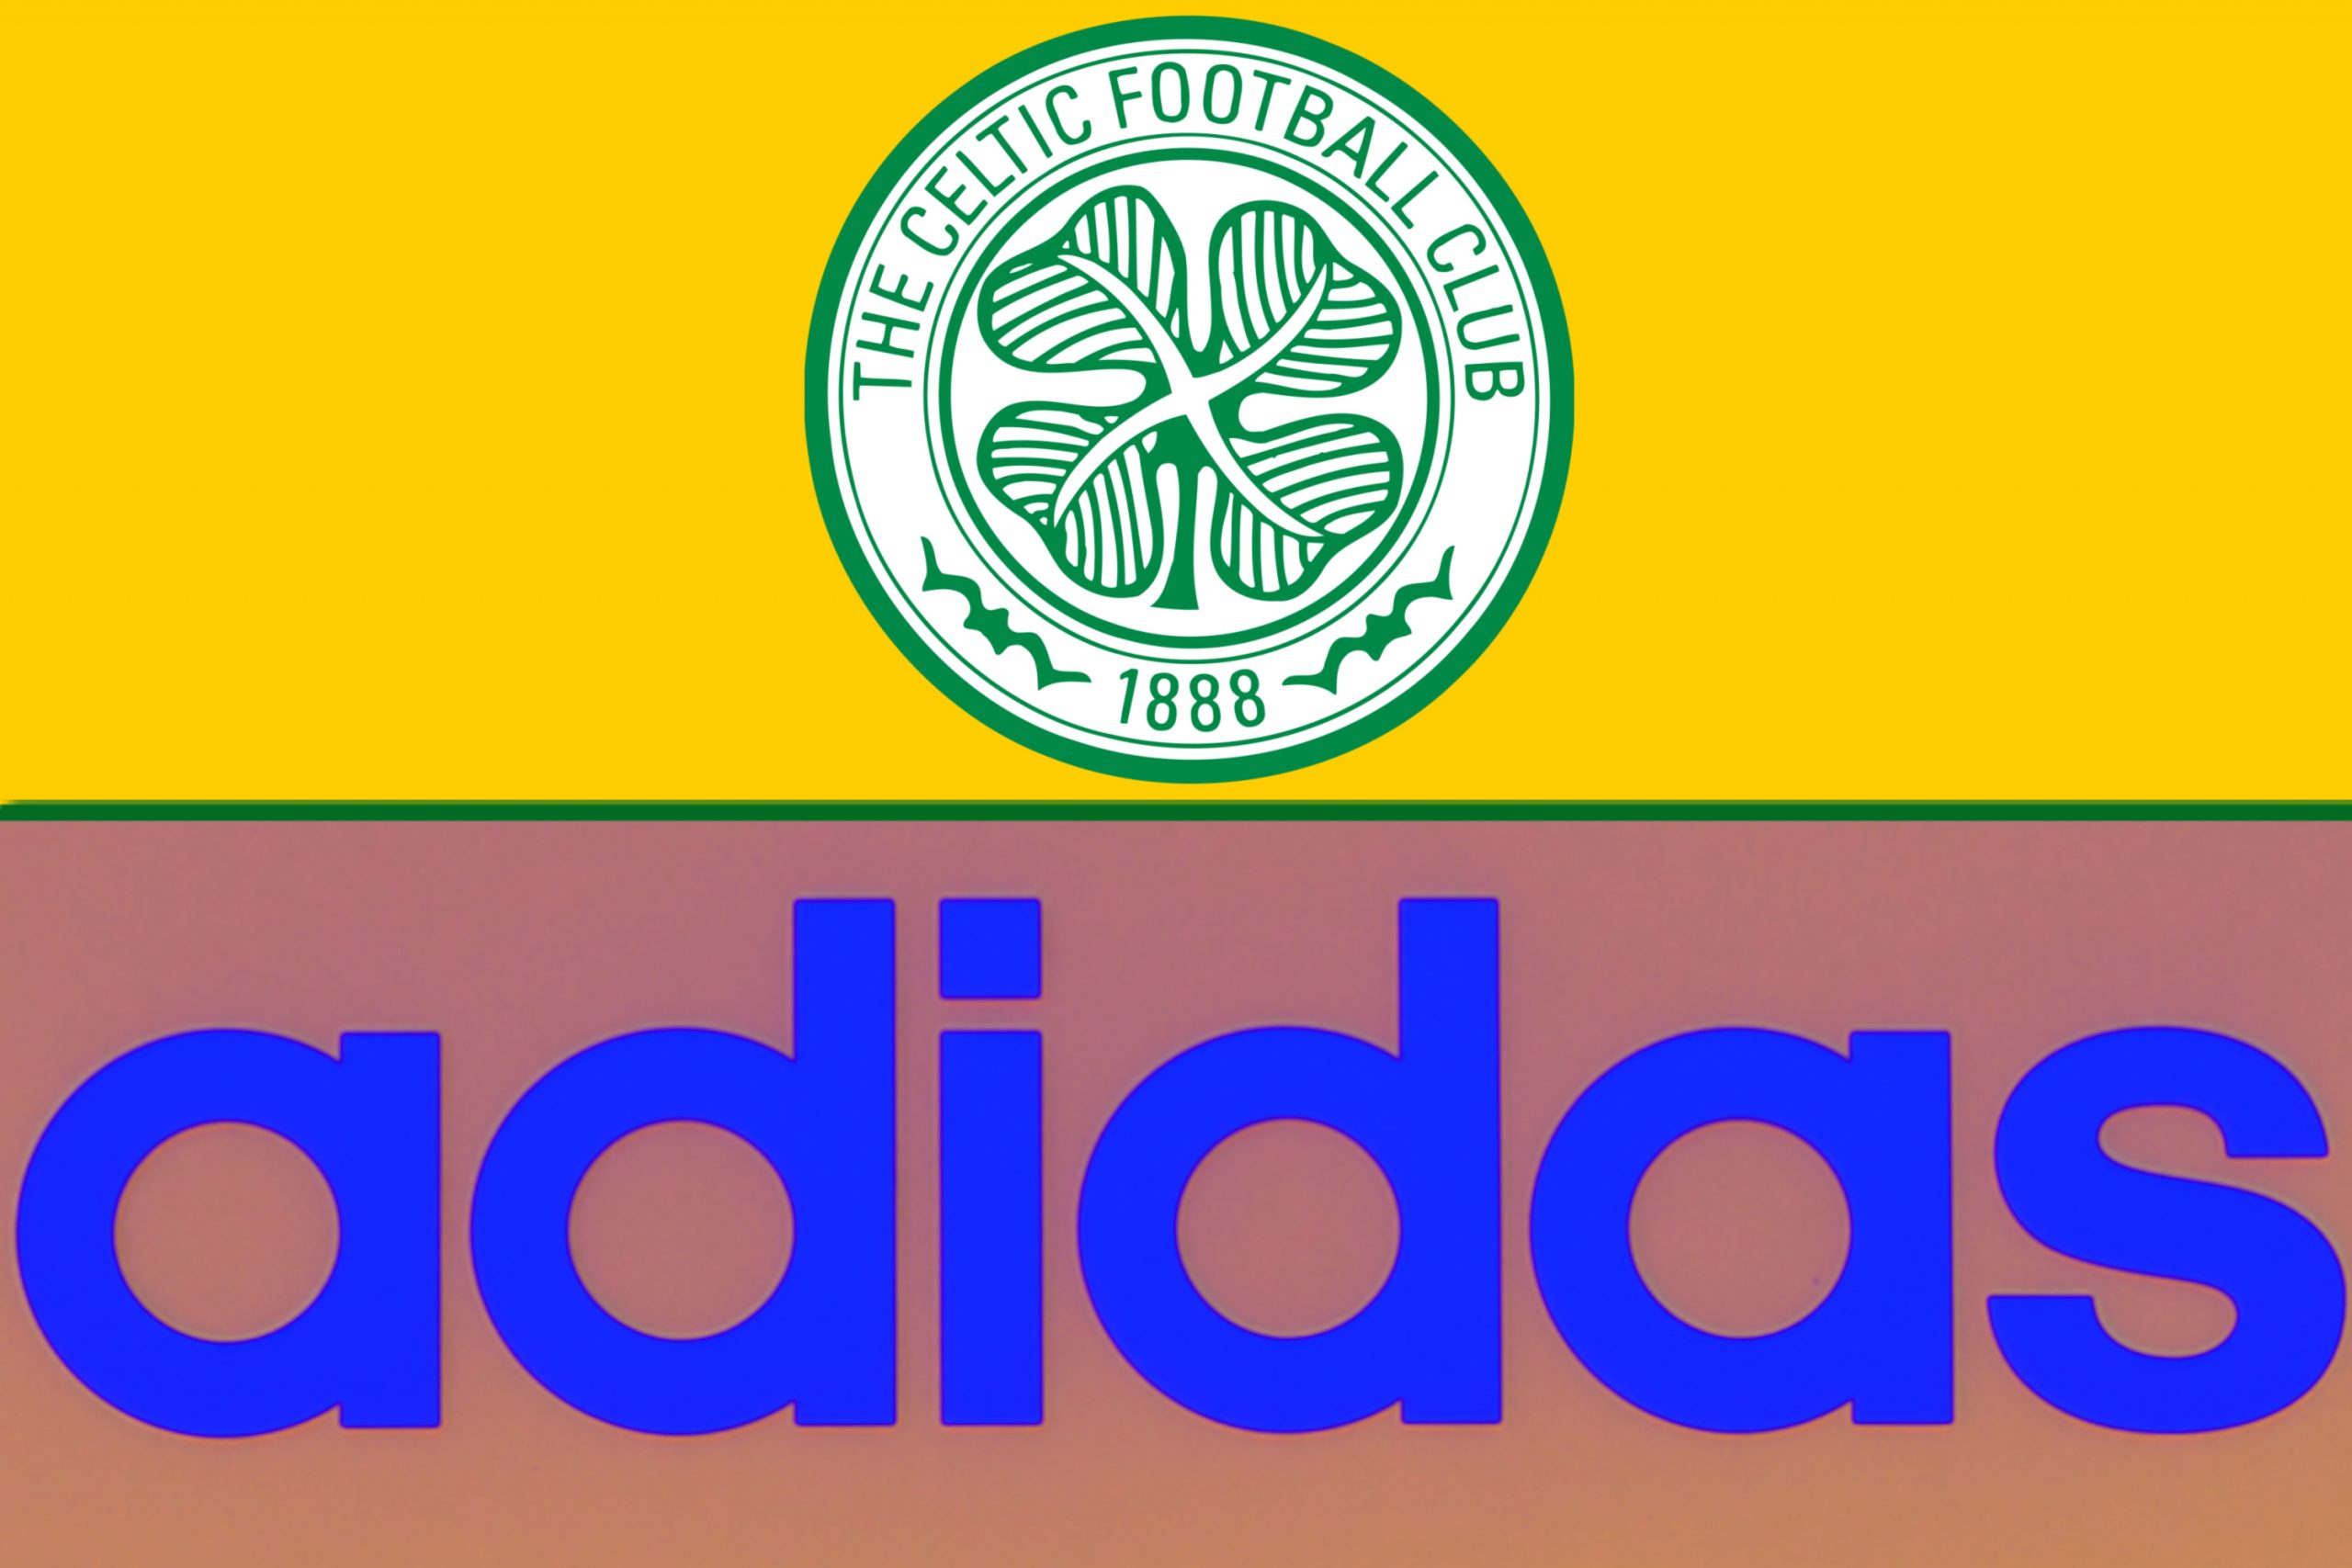 (Photo) This home kit concept for Celtic next season is a certified belter